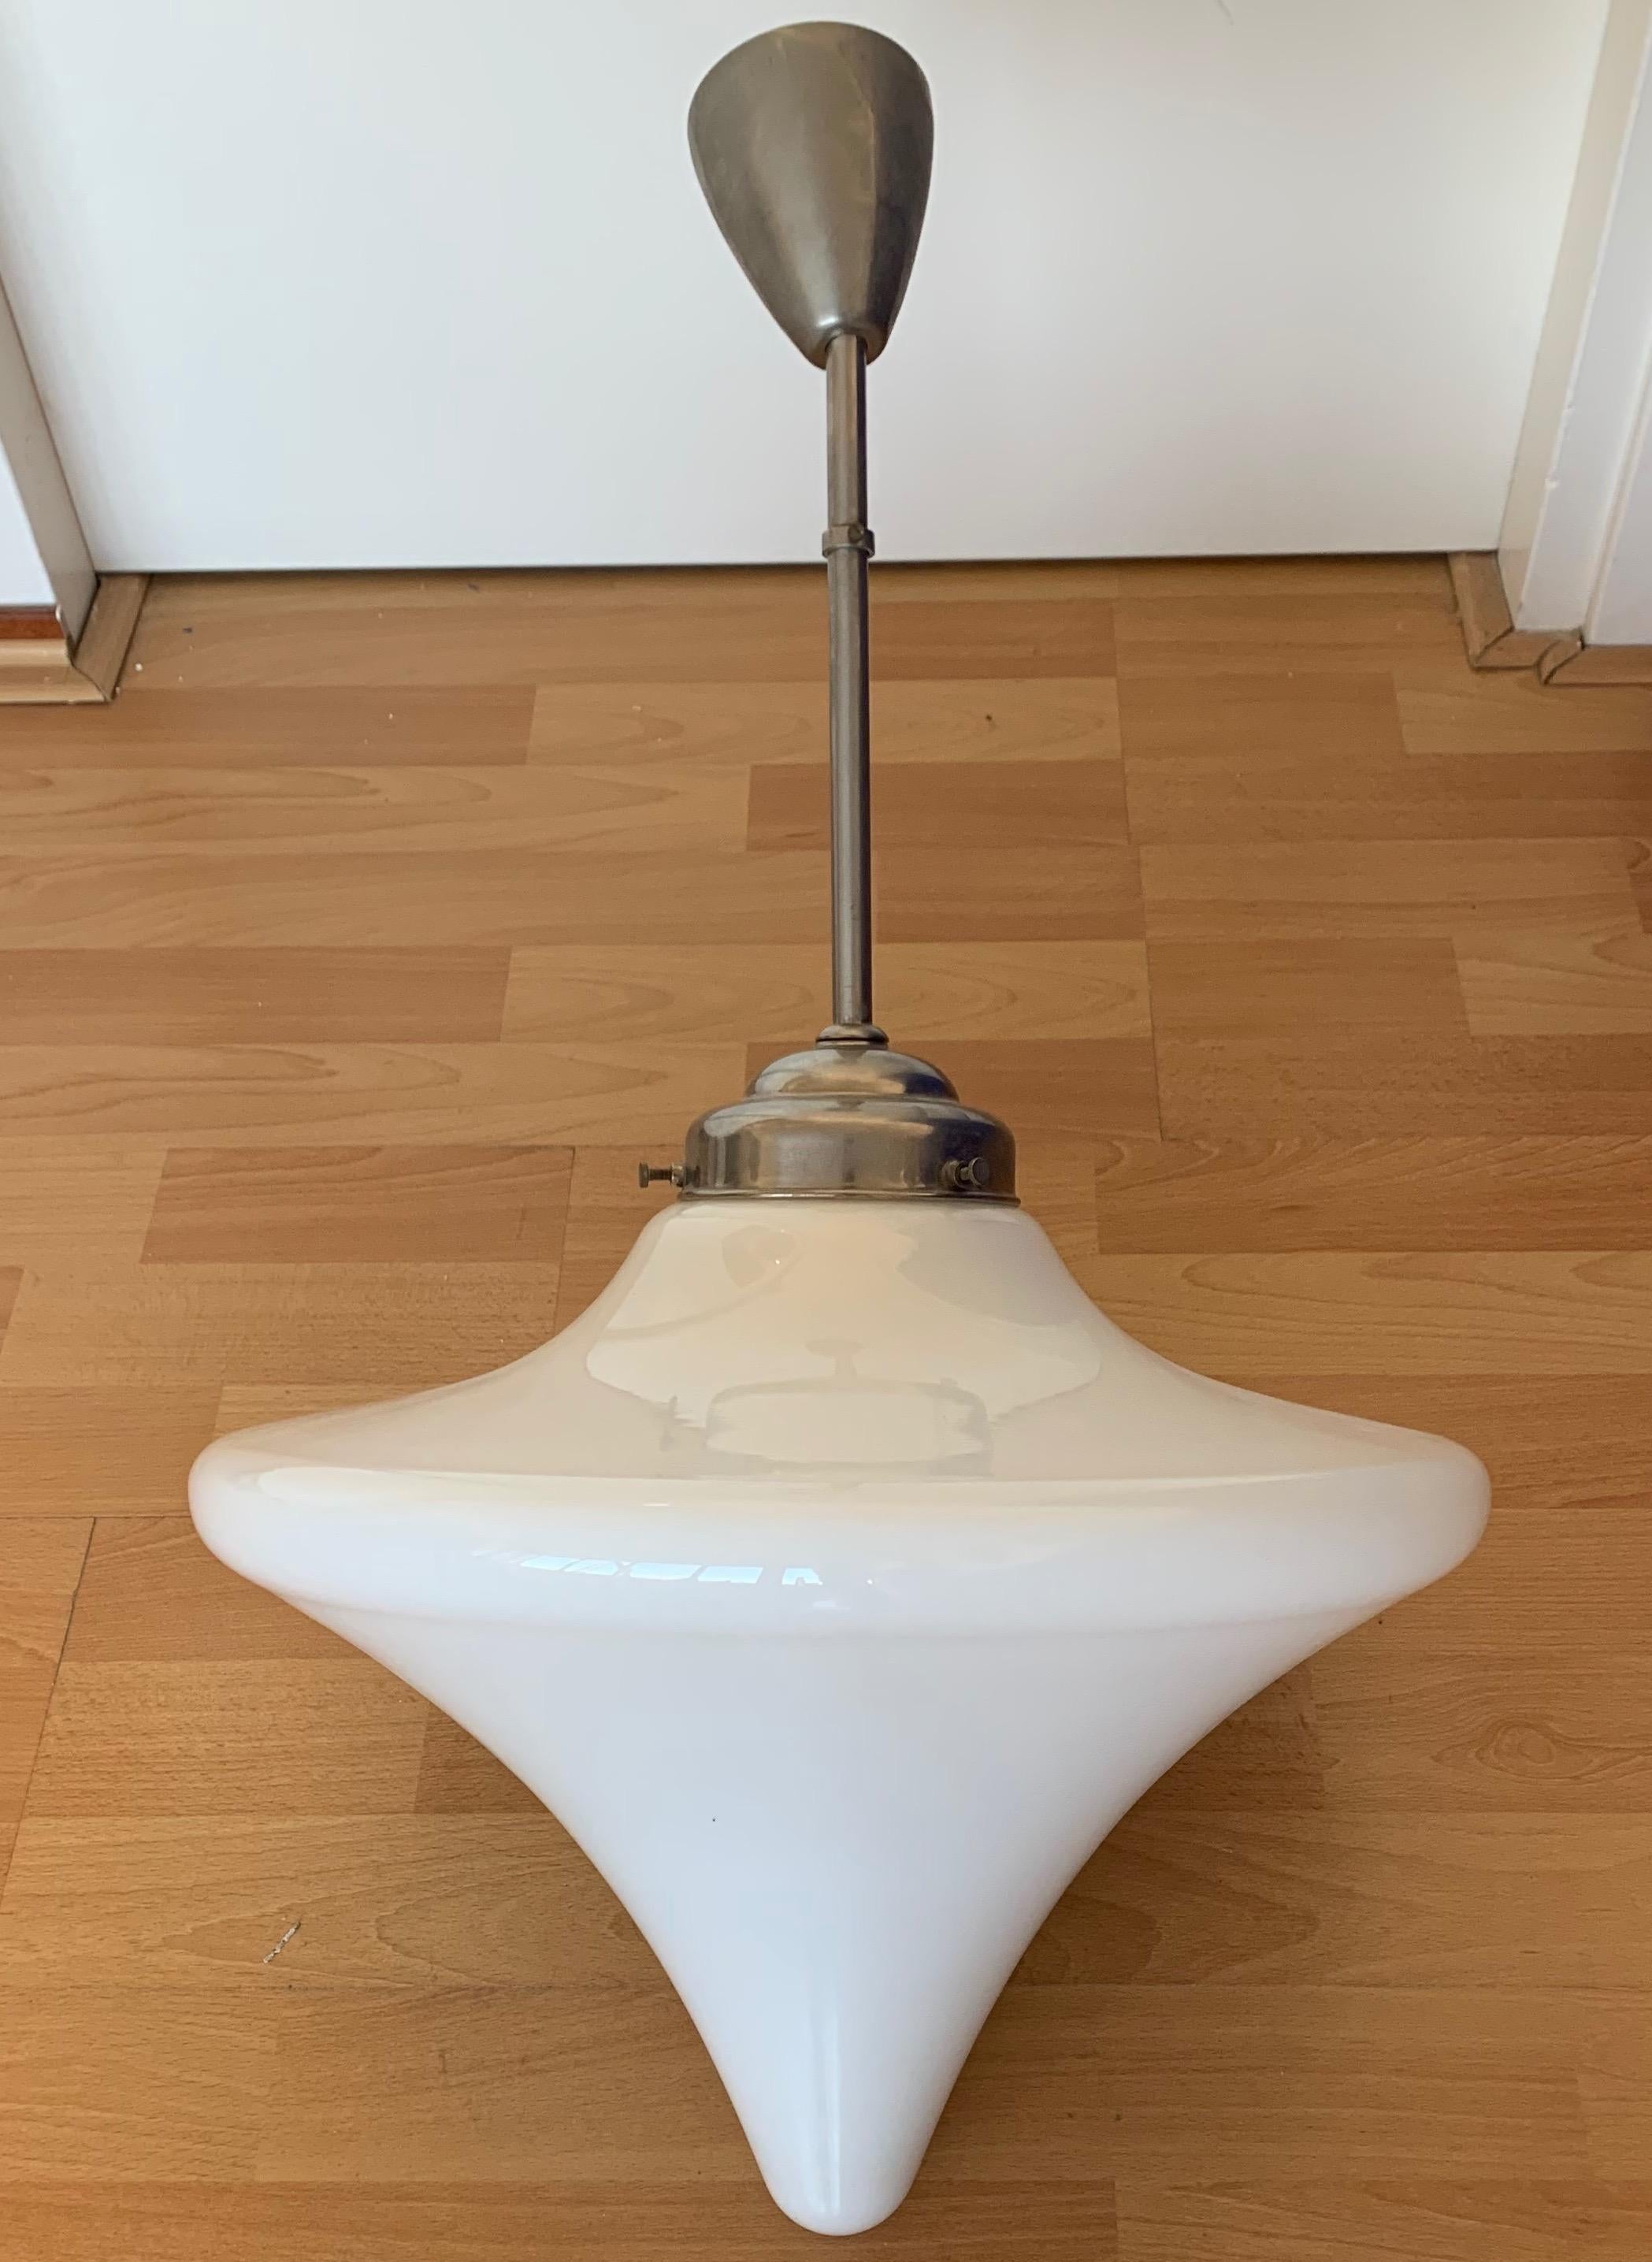 Large size 1920s Bauhaus style fixture with original rod and canopy.

This stunning and extremely rare design opaline glass pendant is in excellent condition. If we were in the business of having unique and exceptional designs from the past